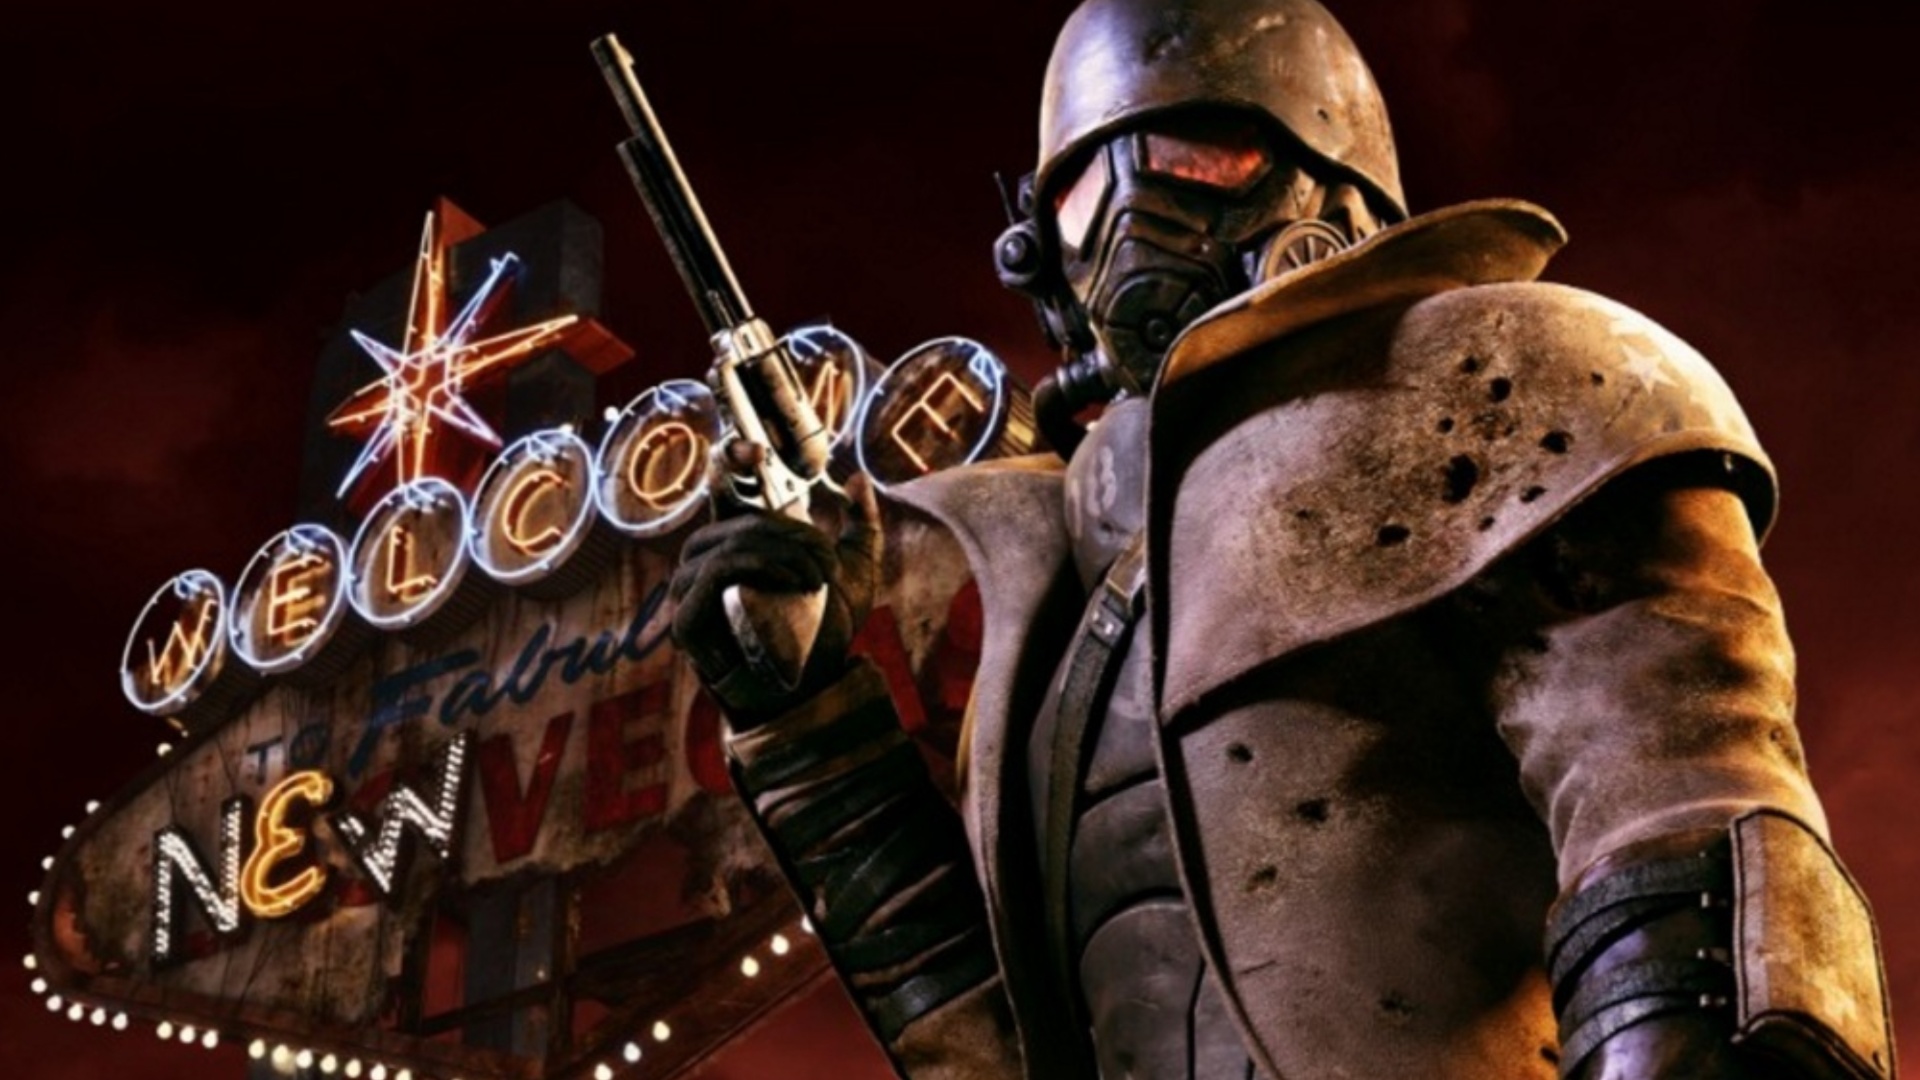 All console commands and cheats for Fallout: New Vegas